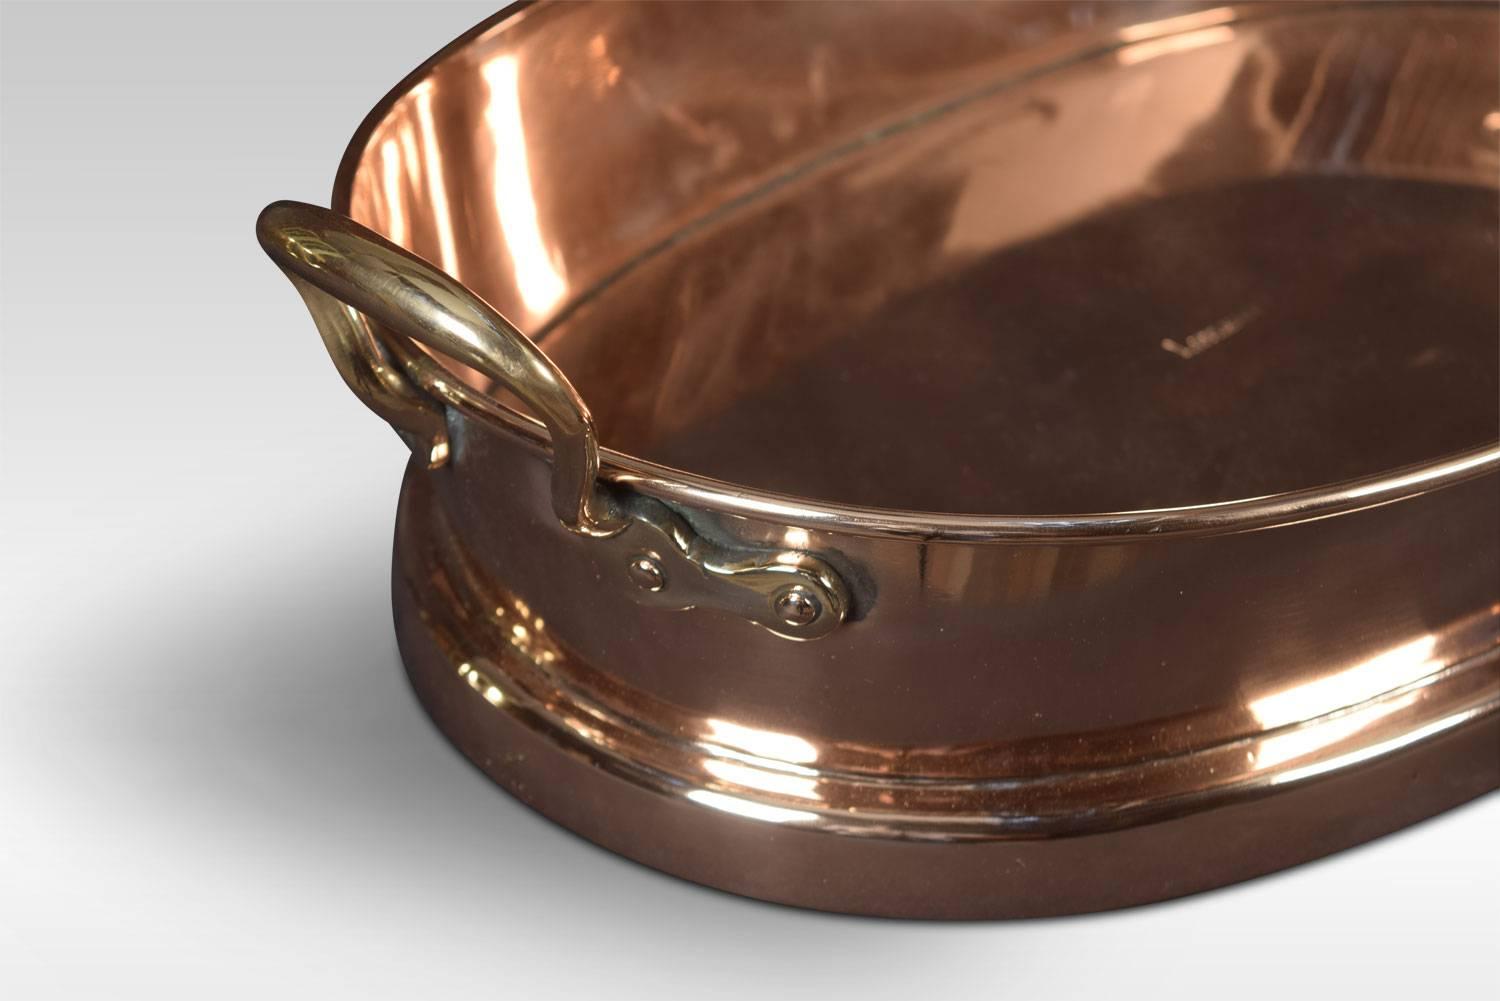 Large heavy copper oval baking dish, saute pan or paella dish with conforming brass handles.
Dimensions
Height 6.5 inches
Width 21 inches
Depth 12.5 inches.